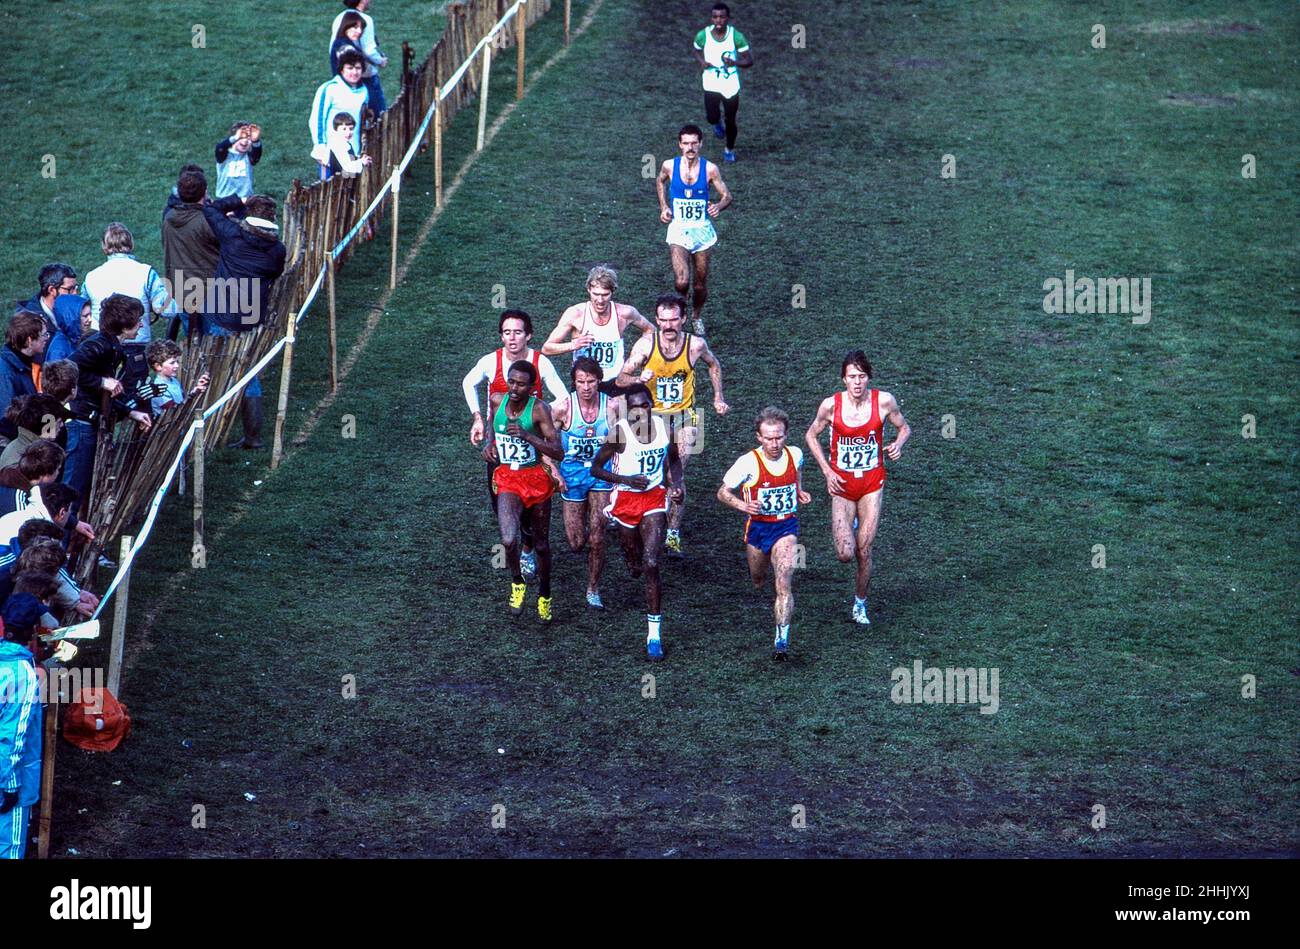 Bekele Debele (ETH) #123 winner, Carlos Lopes (POR) #293 second, Some Muge (KEN) #197 third place in the 1983 IAAF World Cross Country Championships. Stock Photo